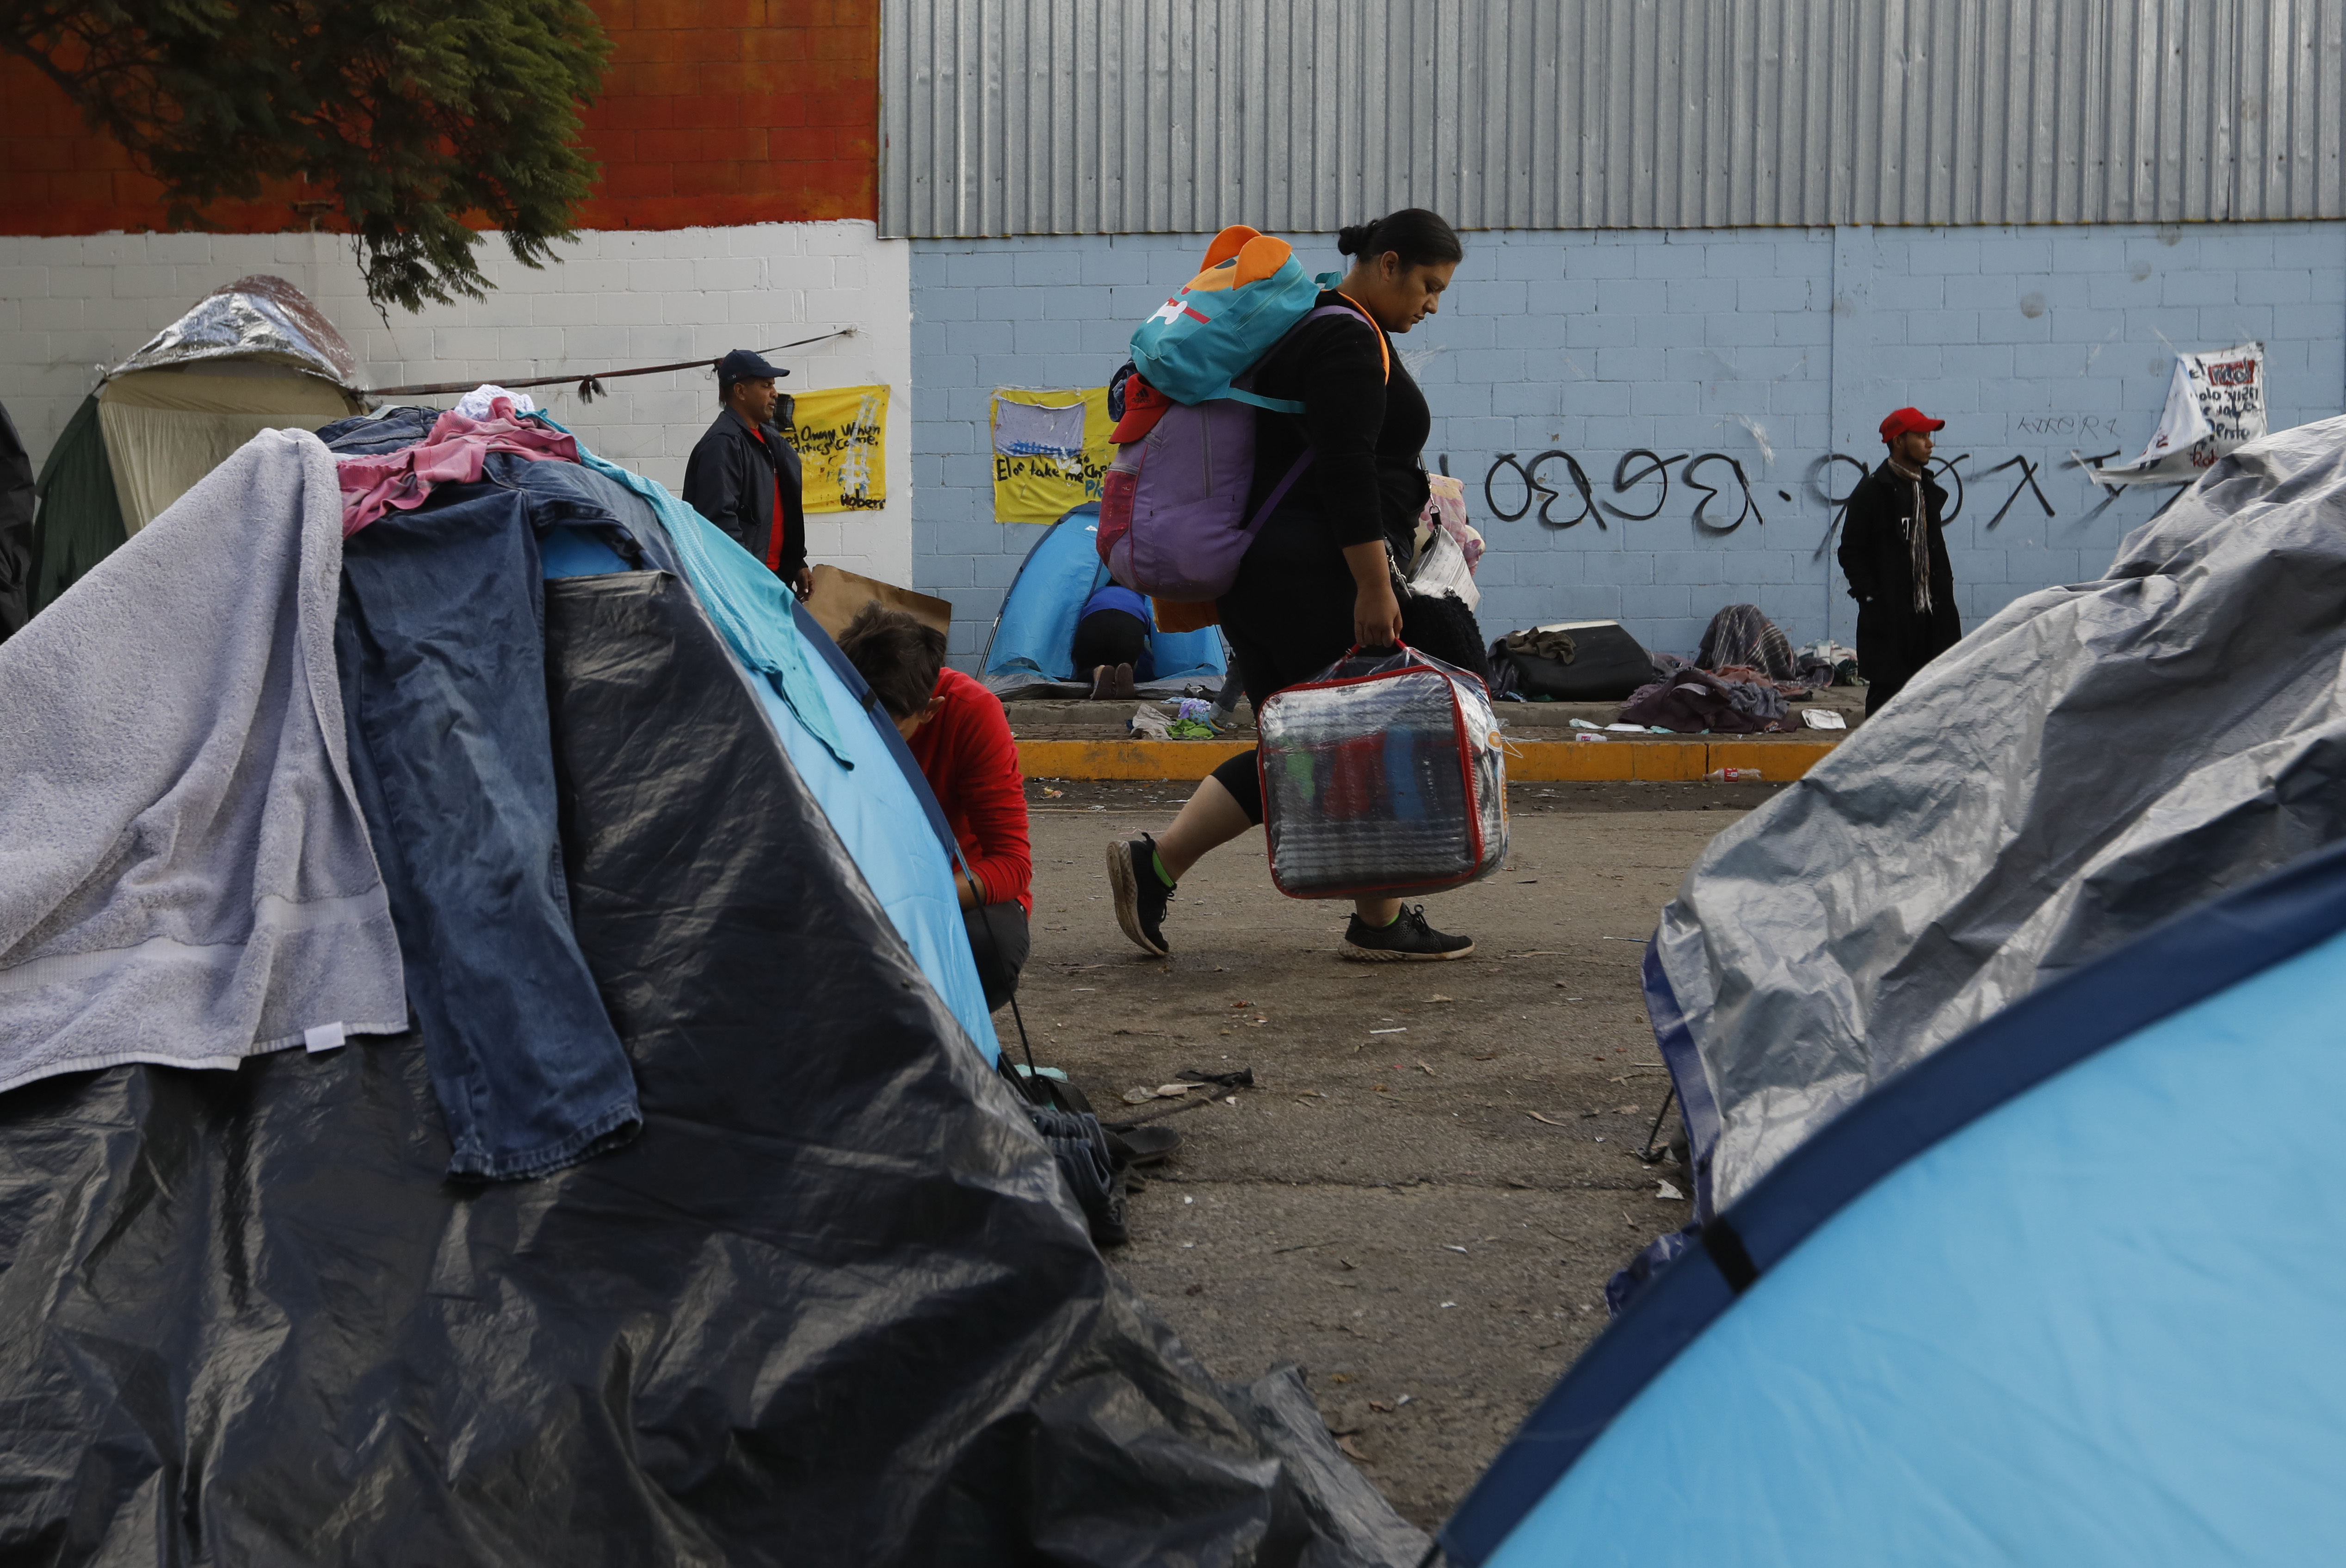 A woman carries her bags past tents as migrants decide individually whether to accept the city's plan to move them to a new shelter from the Benito Juarez sports complex, in Tijuana, Mexico, Friday, Nov. 30, 2018. Authorities in the Mexican city of Tijuana have begun moving some of more than 6,000 Central American migrants from an overcrowded shelter on the border to an events hall further away.(AP Photo/Rebecca Blackwell)